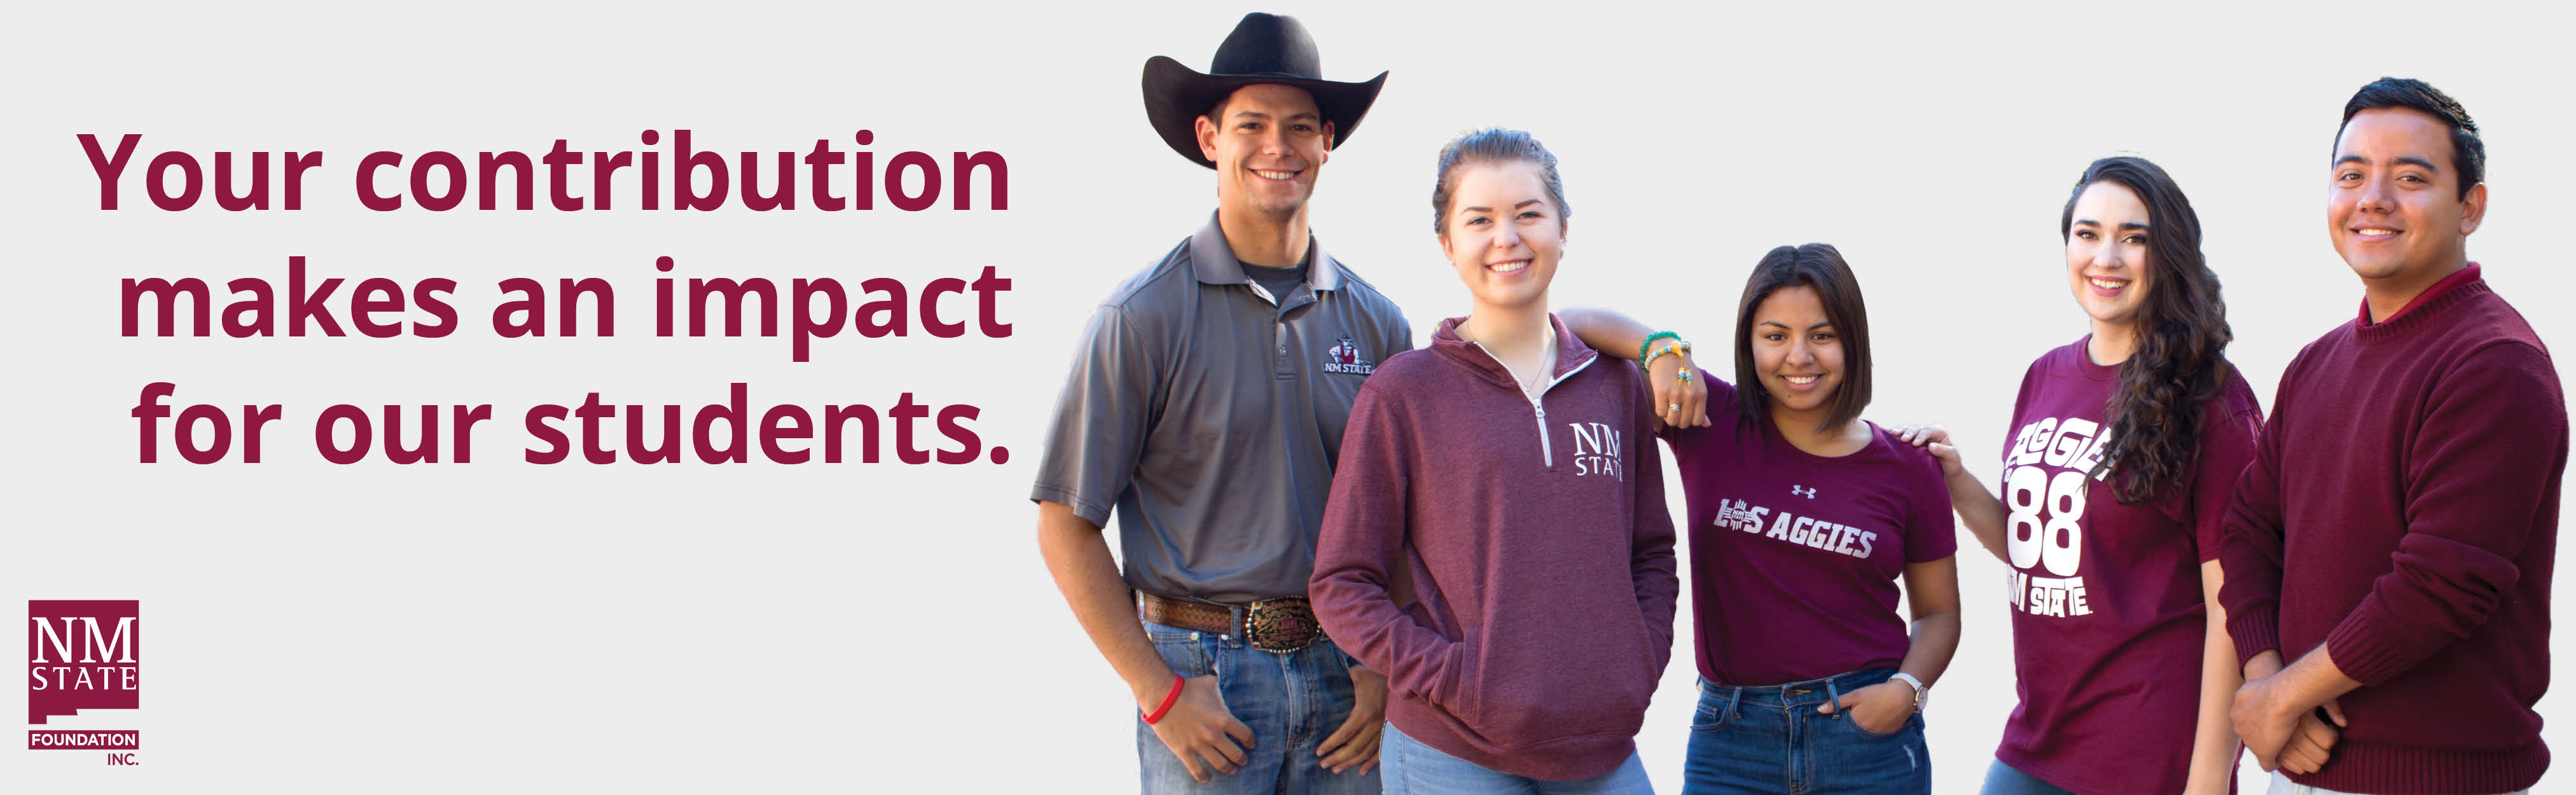 Image of 5 diverse NMSU students with the quote "Your Contribution makes an impact for our students."